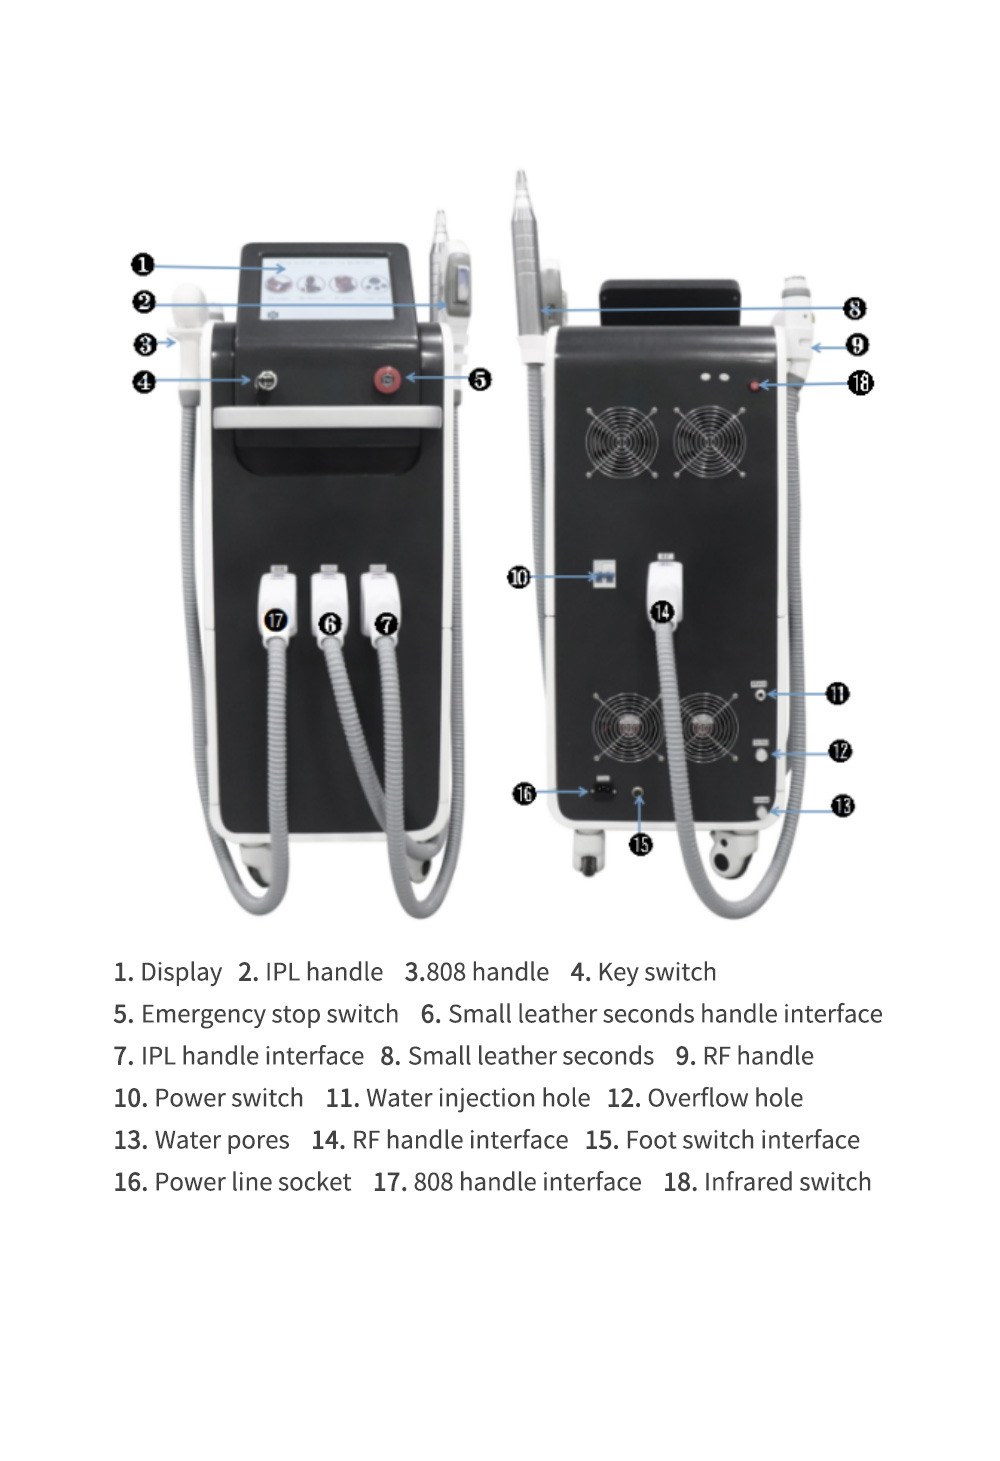 Diode Laser + ND YAG Laser + IPL + RF 4 in 1 Multifunctional Beauty Equipment